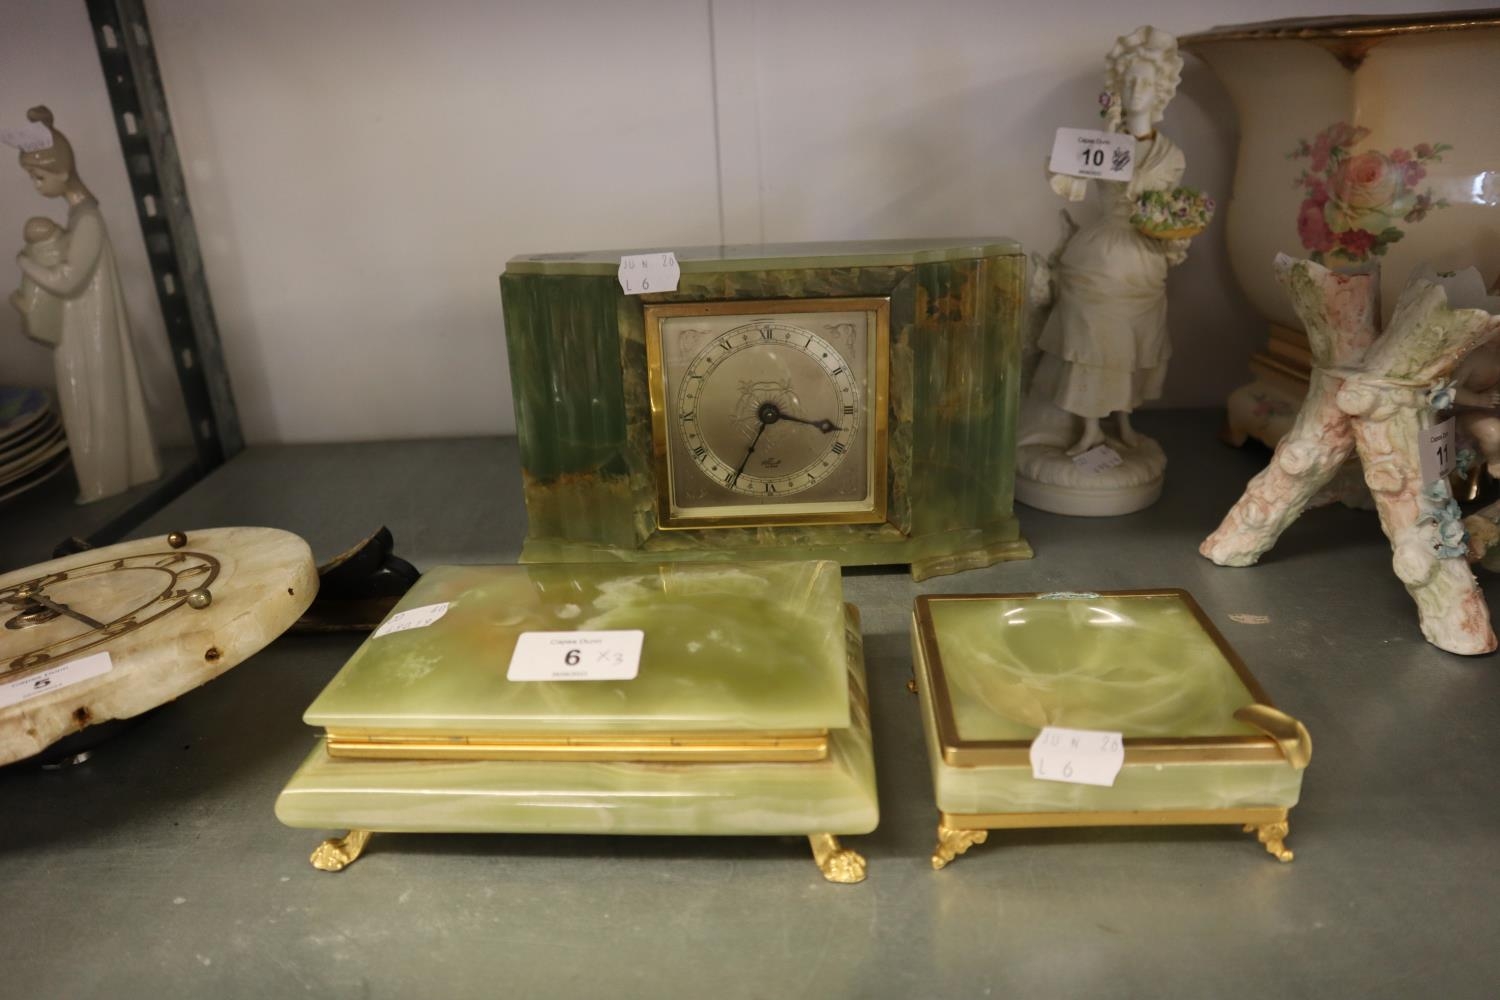 AN ELLIOTT GREEN ONYX ART DECO MANTEL CLOCK WITH SQUARE SILVERED DIAL, SPRING WIND MOVEMENT,